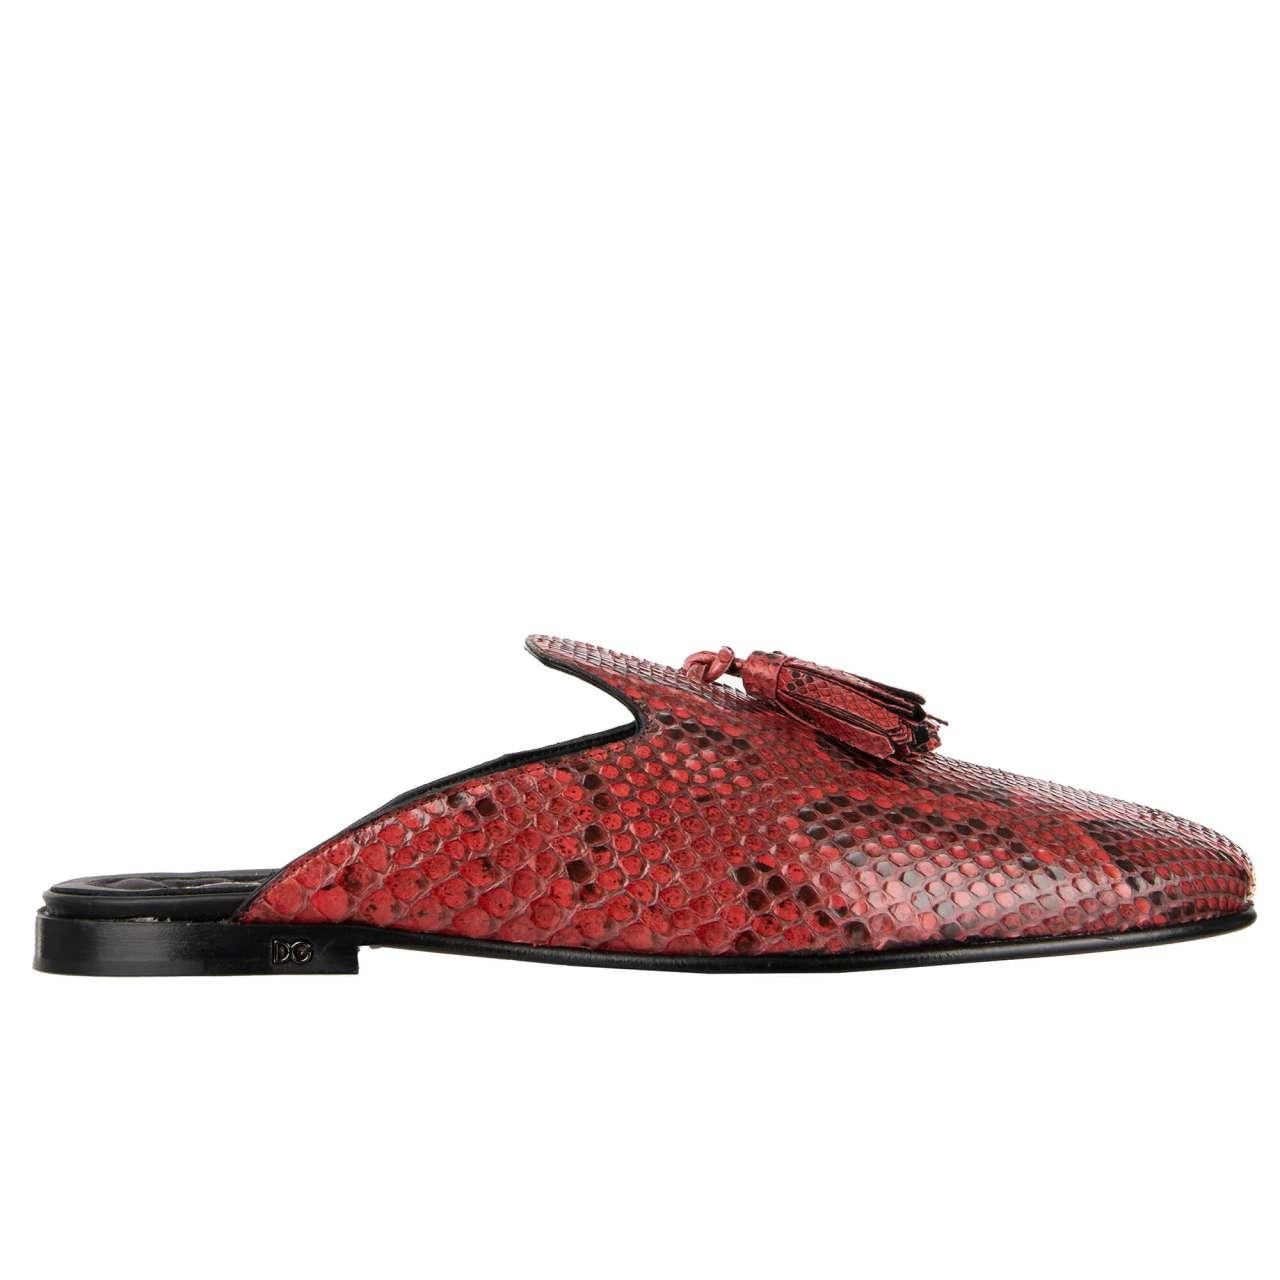 Men's D&G Snake Leather Tassels Shoes Slipper YOUNG POPE Red 44 UK 10 US 11 For Sale